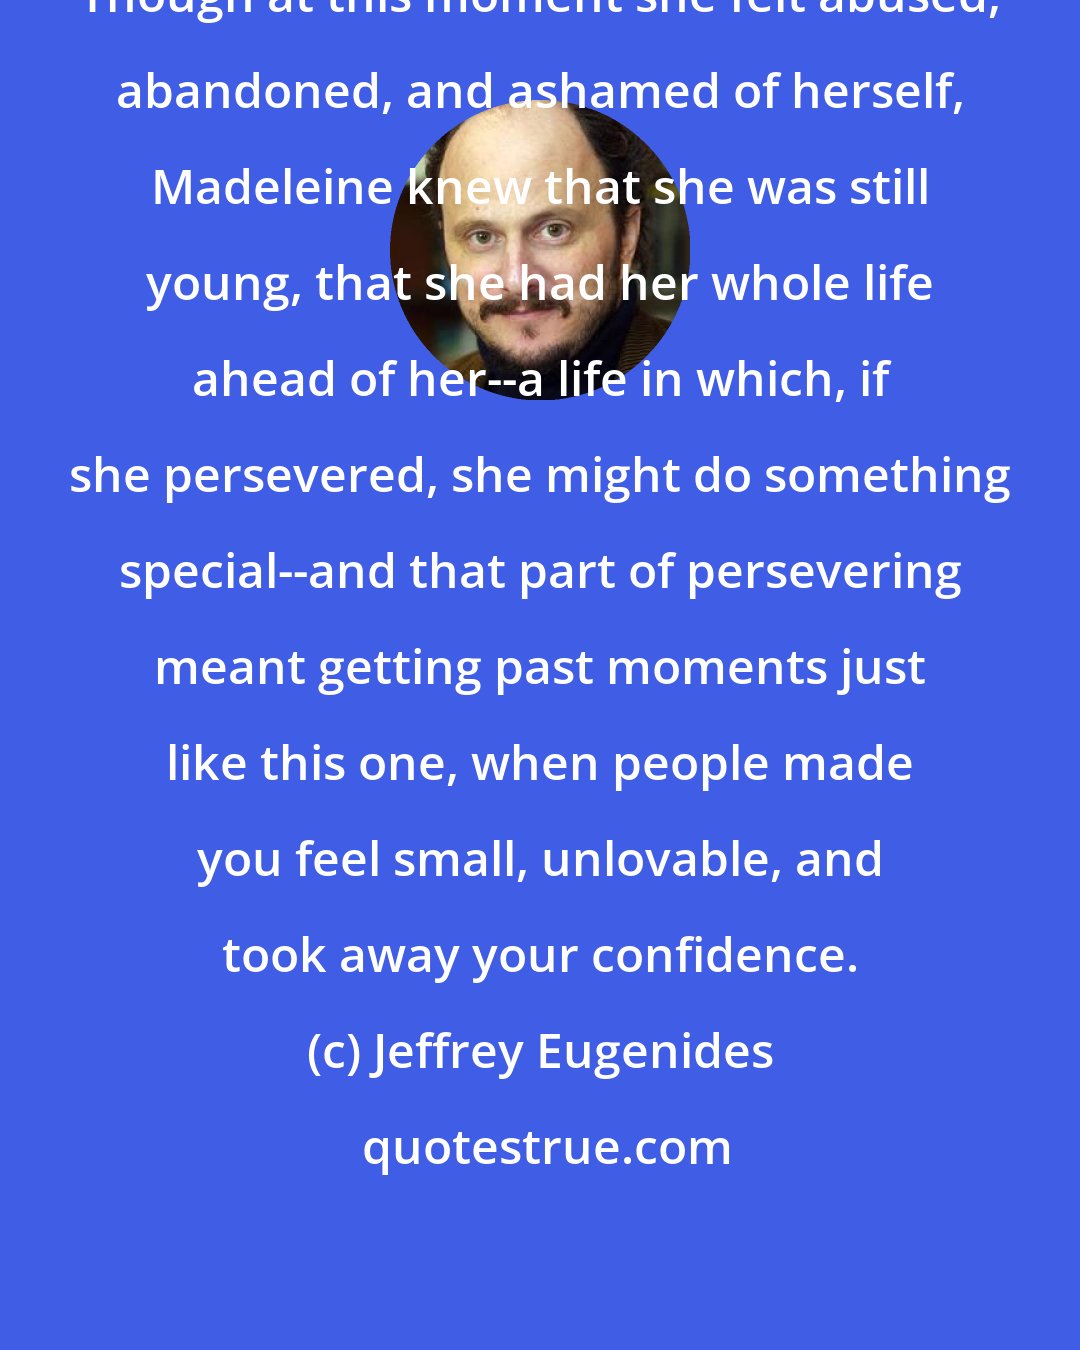 Jeffrey Eugenides: Though at this moment she felt abused, abandoned, and ashamed of herself, Madeleine knew that she was still young, that she had her whole life ahead of her--a life in which, if she persevered, she might do something special--and that part of persevering meant getting past moments just like this one, when people made you feel small, unlovable, and took away your confidence.